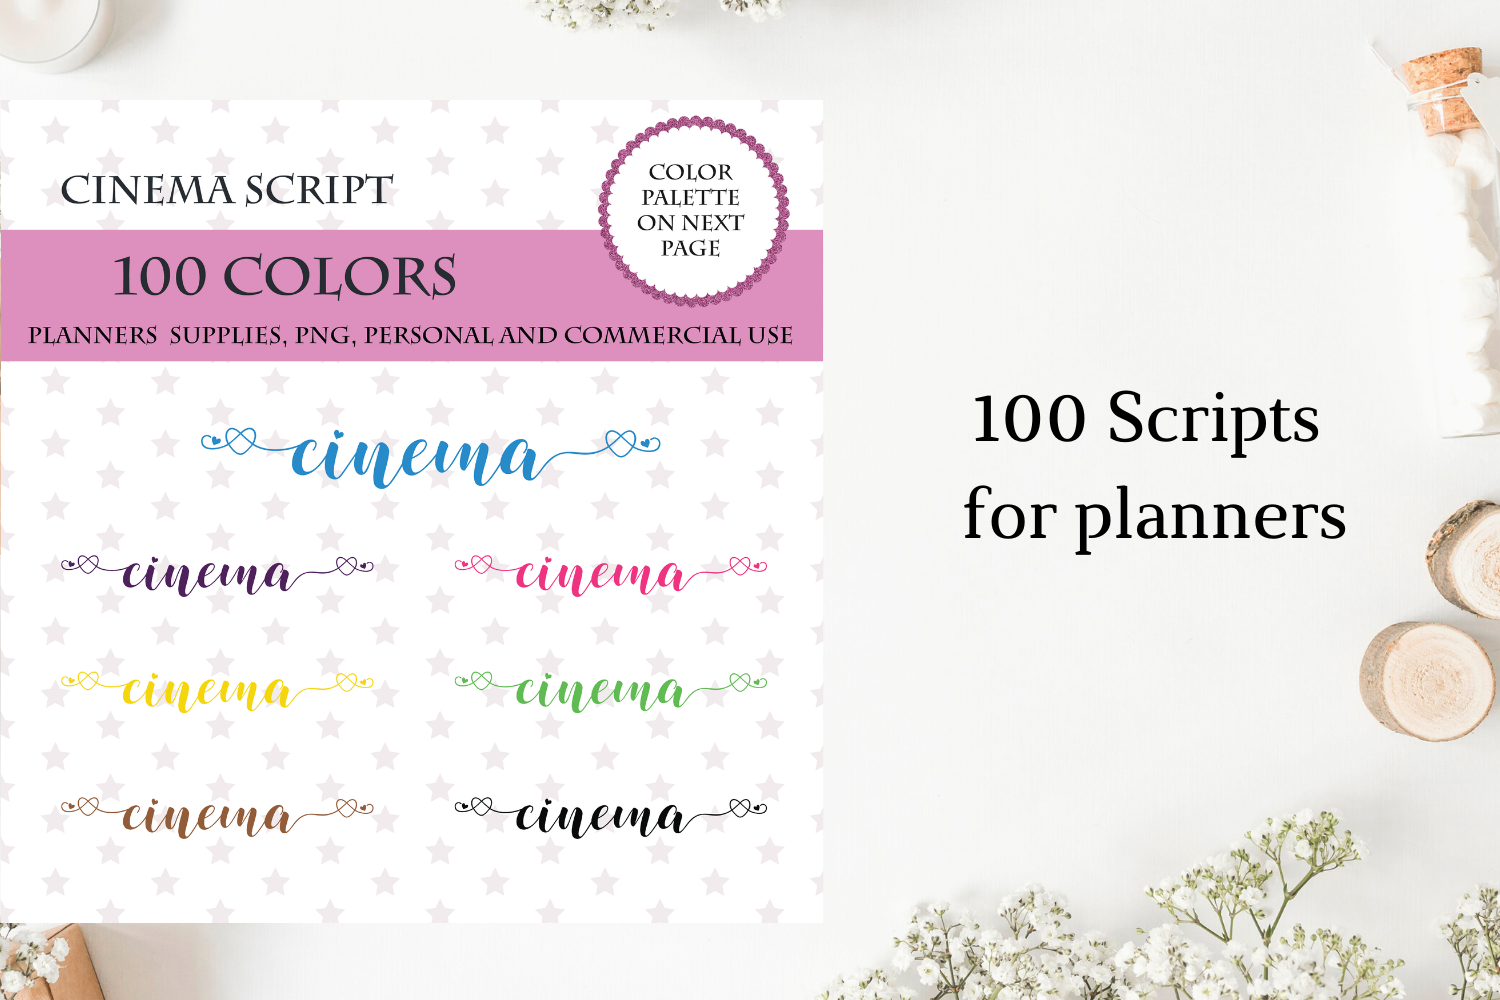 Cinema Font Clipart Cinema Sticker Clipart Cinema For Planner Cinema Script By Old Continent Design Thehungryjpeg Com